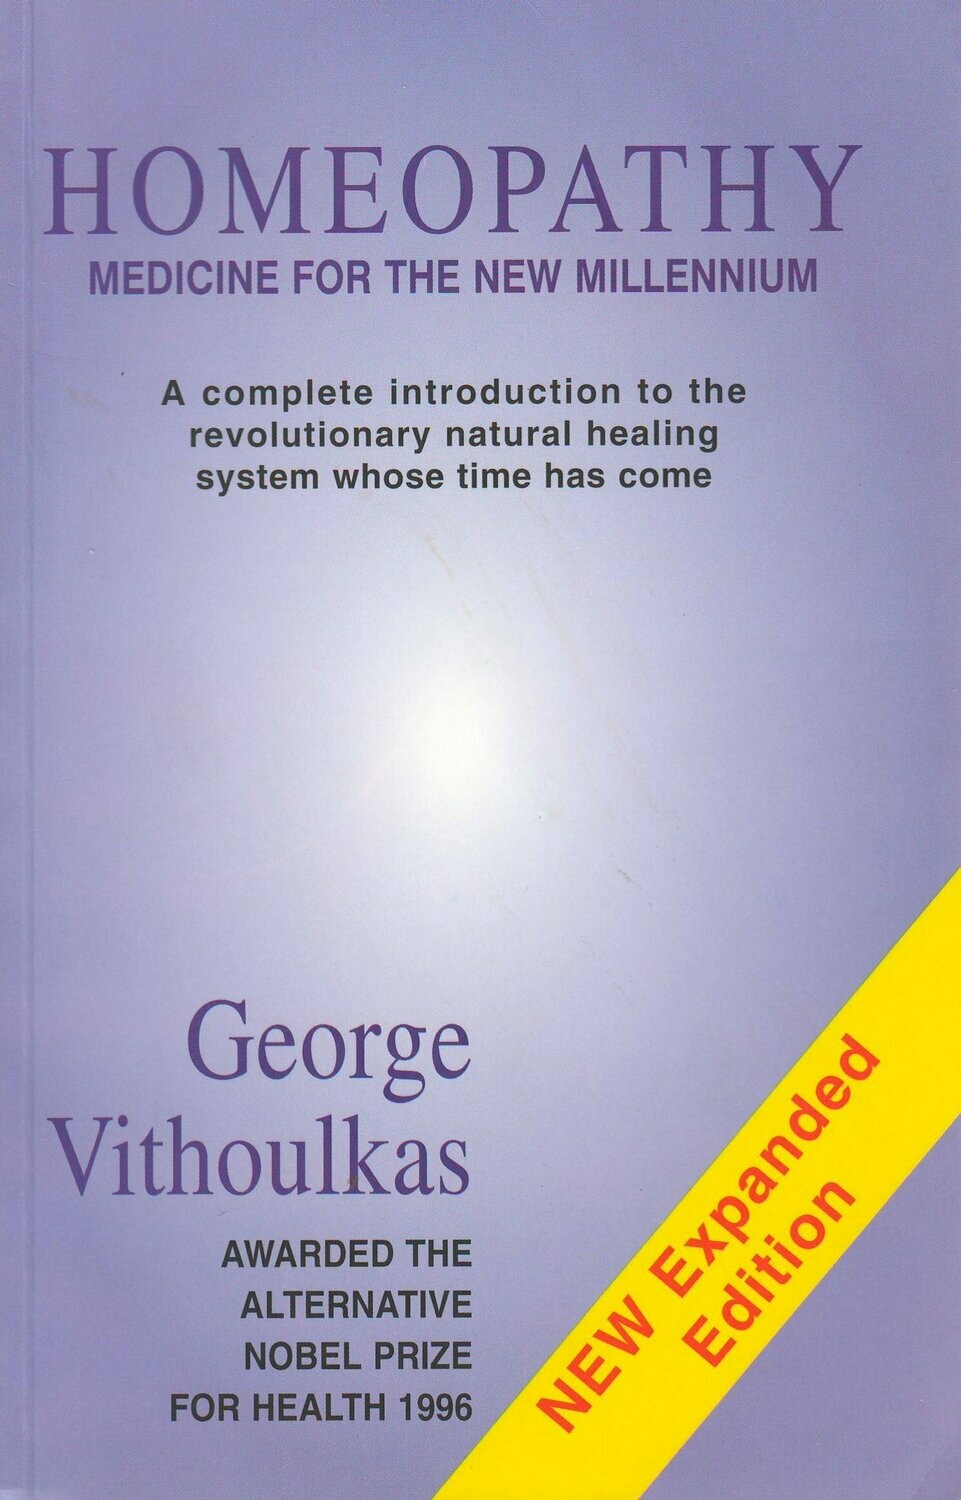 Homeopathy Medicine for the new millennium